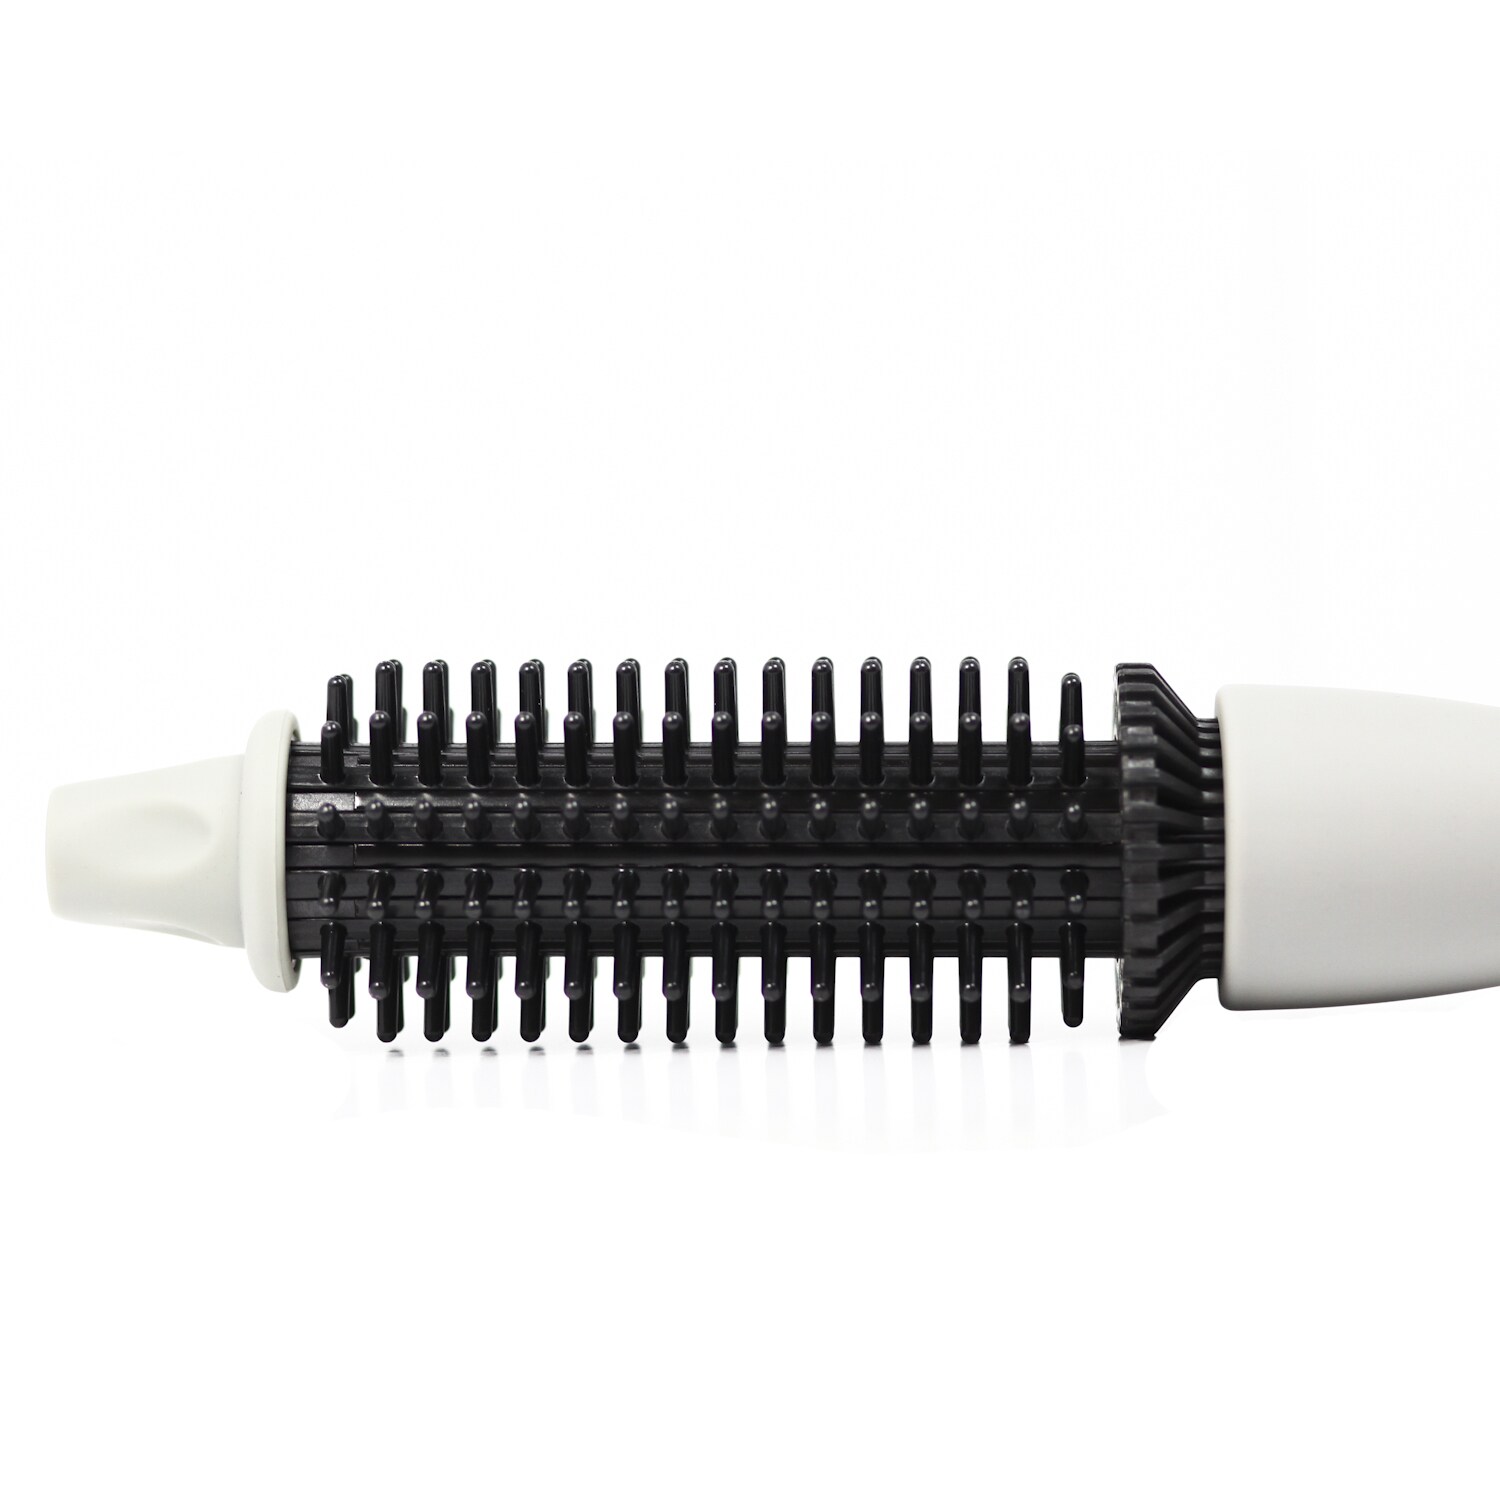 Calista Perfecter Pro Plus Heated Round Brush, Professional Styling Brush,  Burn-Free Firm Bristles, Ionic and Ceramic Technology (1.0, Rhododendron)